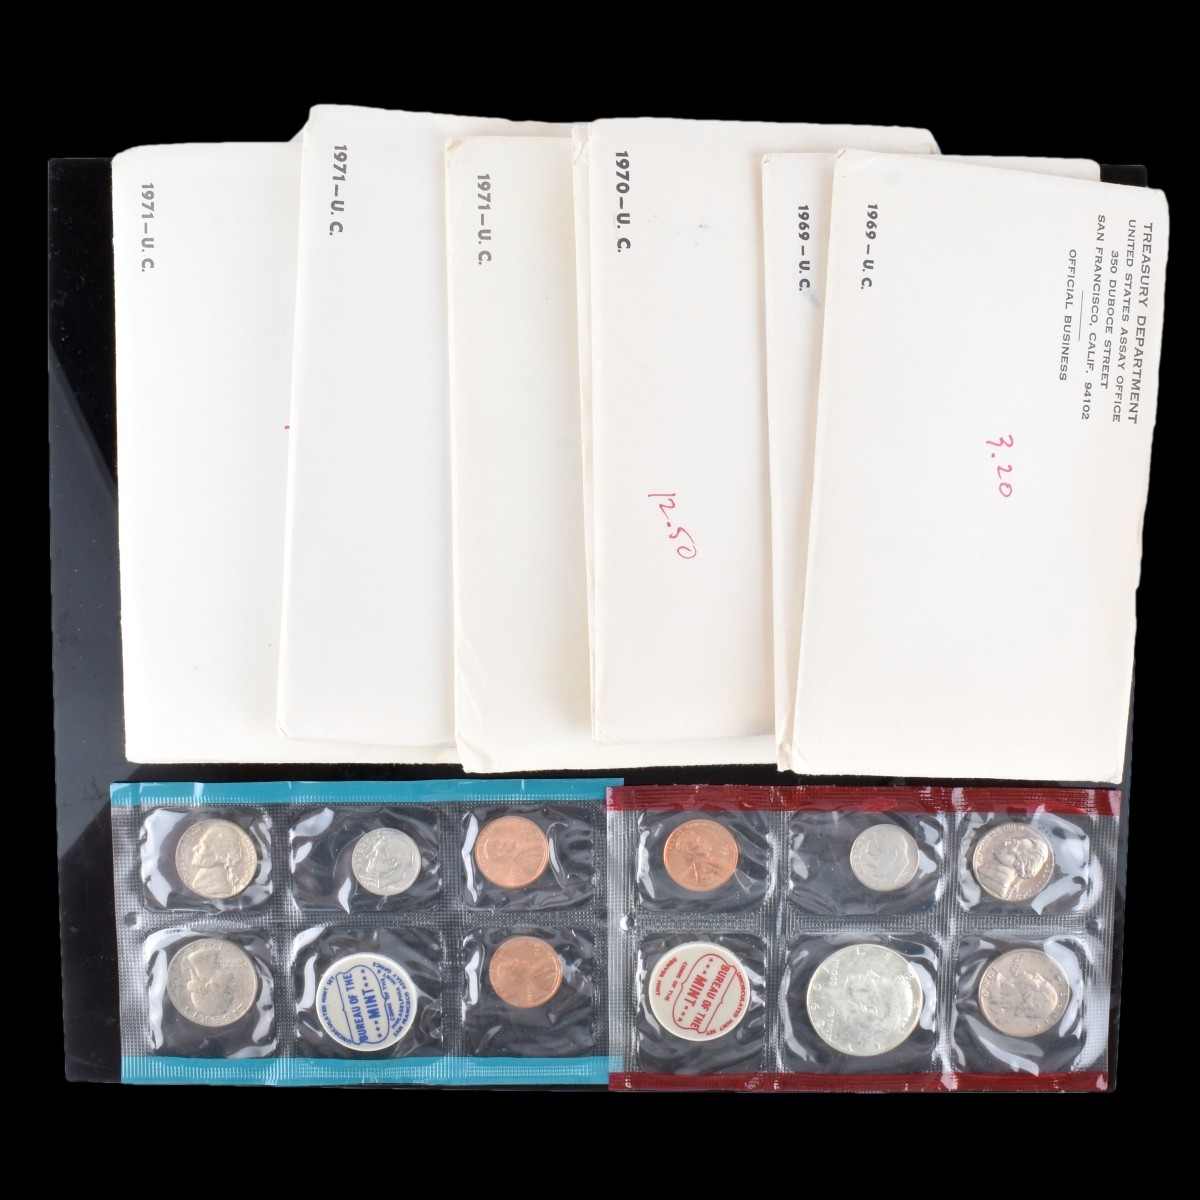 Eight US Mint Coin Sets